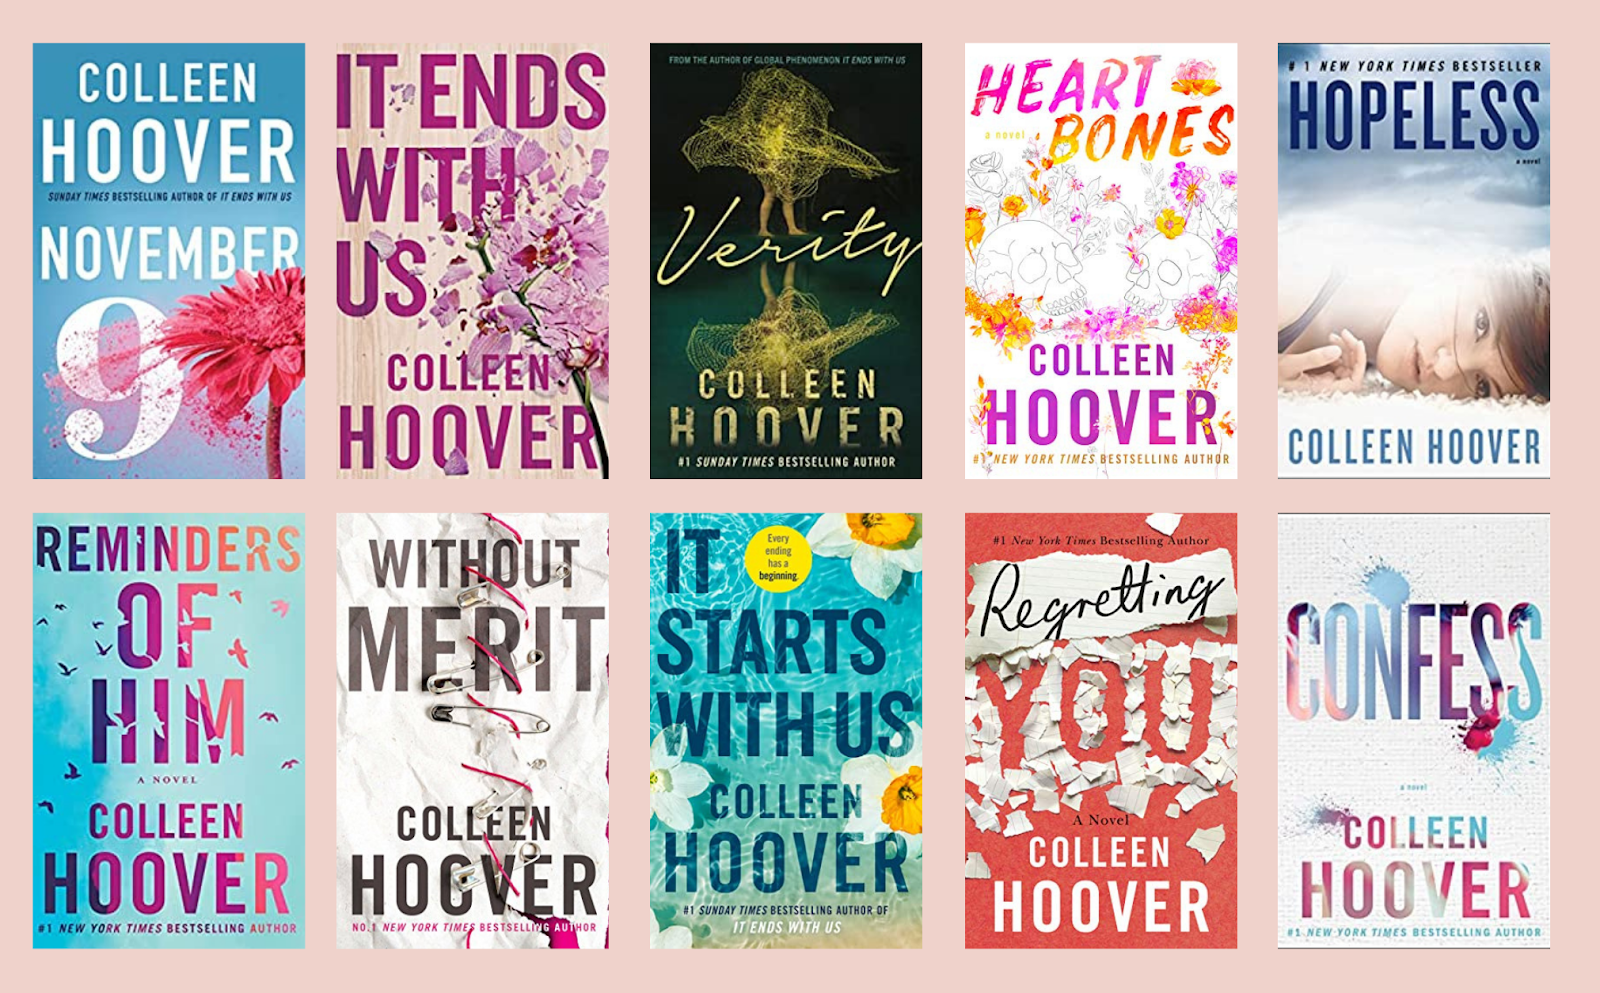 Can’t Handle the Truth!: Colleen Hoover- “Verity”